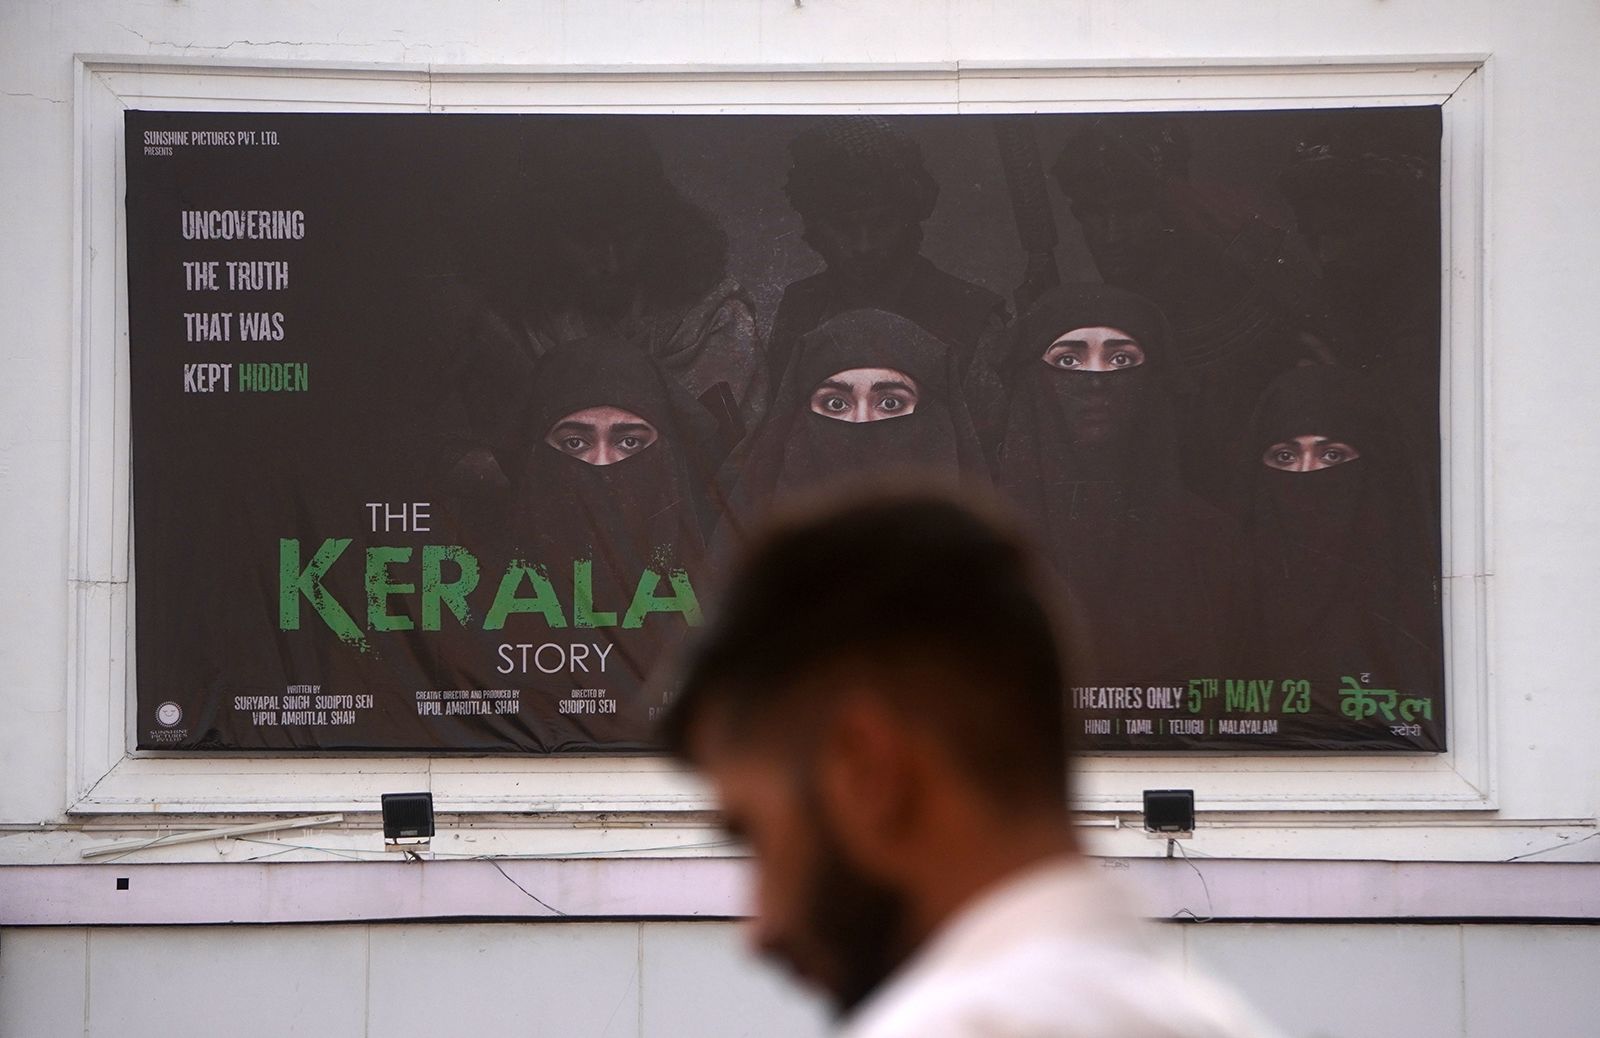 Malayalam Rape Sex - The Kerala Story' is a box office hit in India. It also vilifies Muslims,  critics say. | CNN